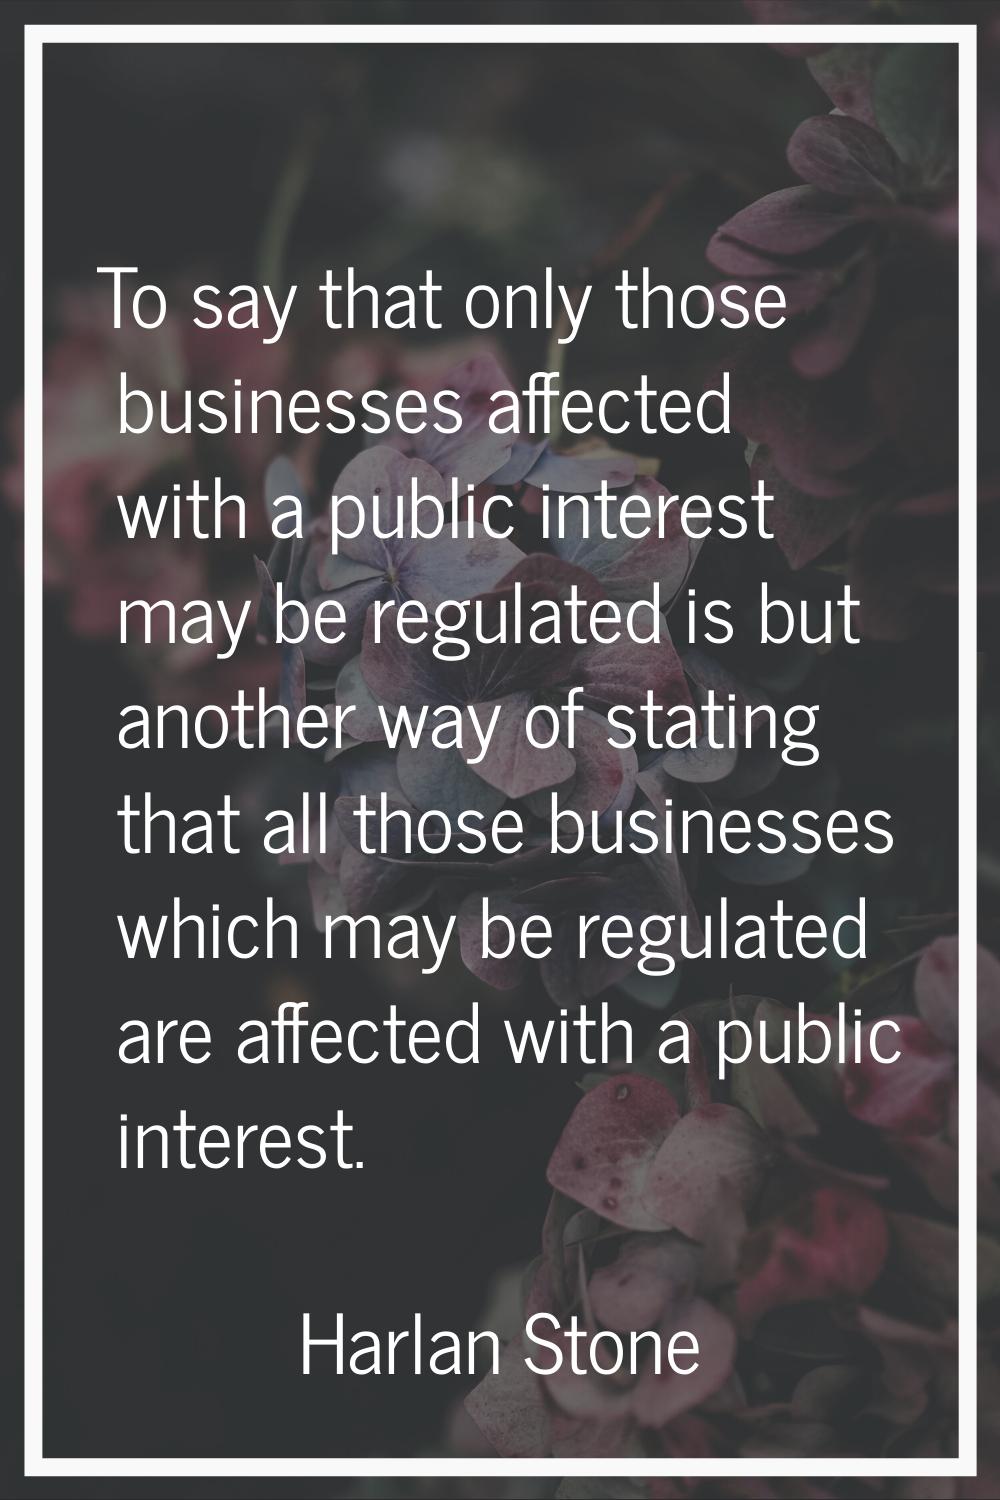 To say that only those businesses affected with a public interest may be regulated is but another w